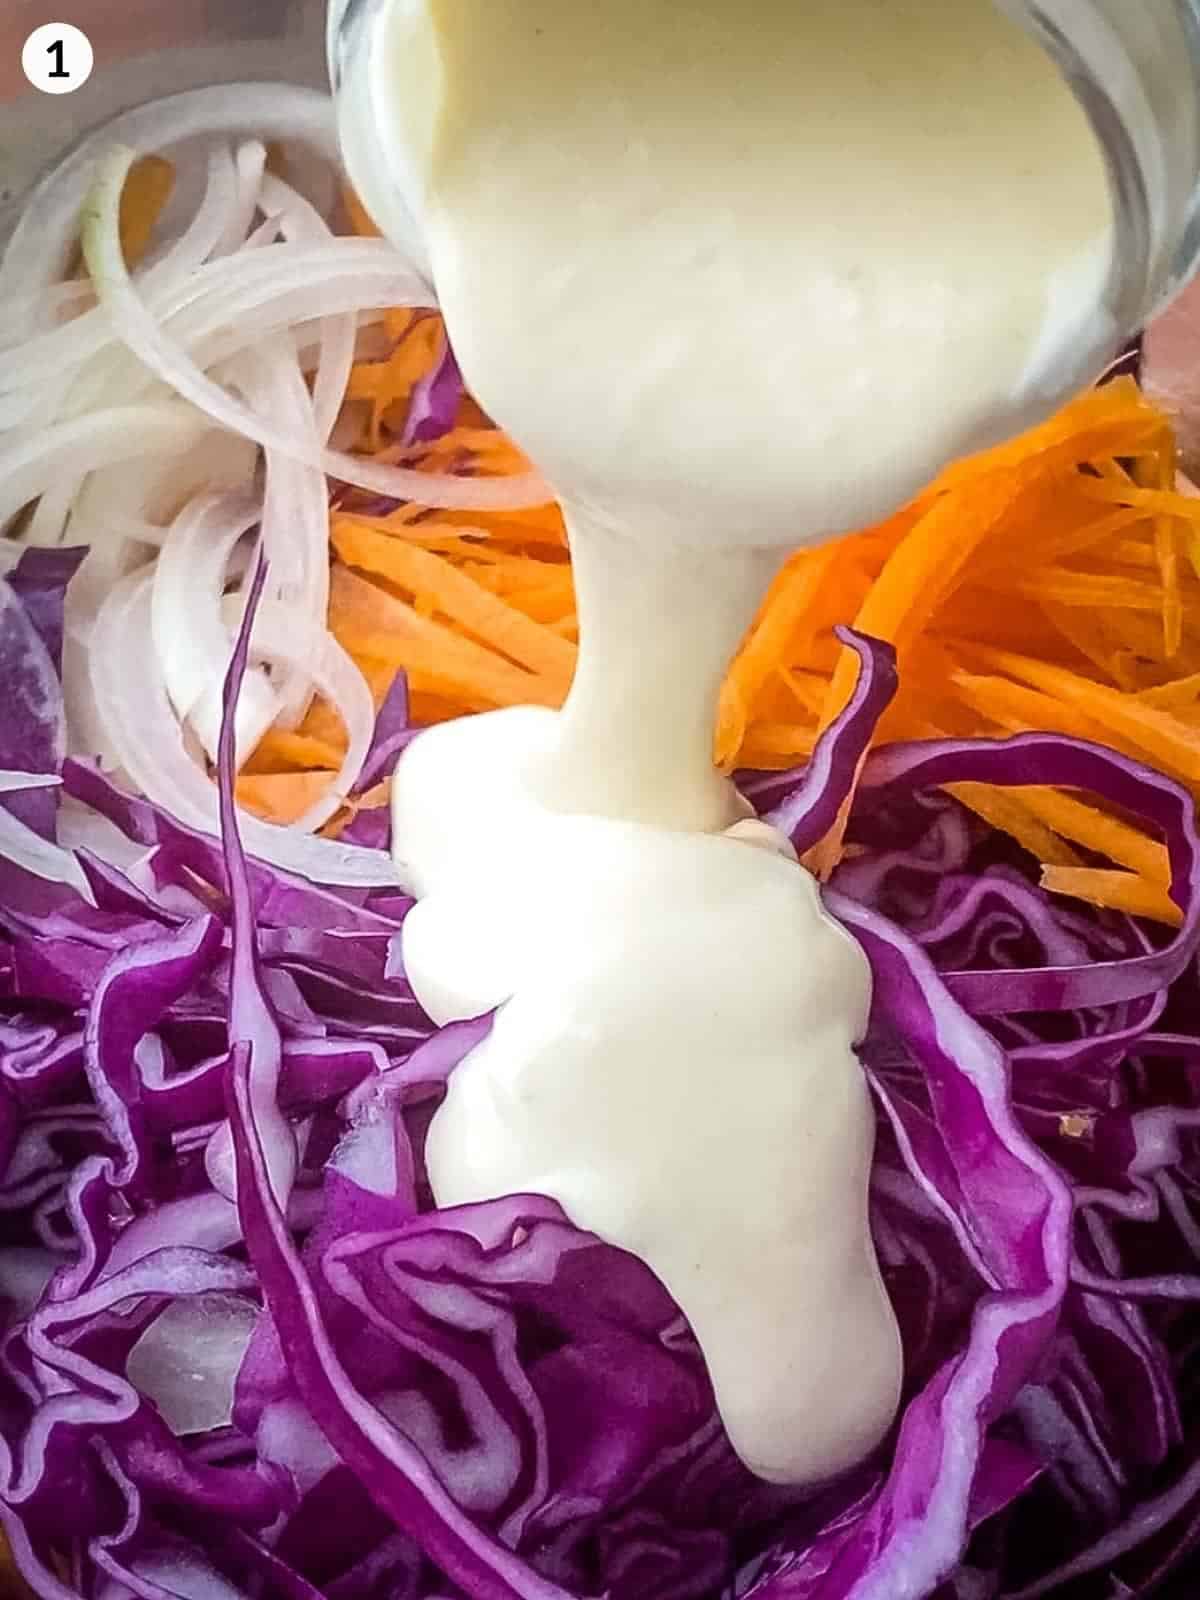 Pouring coleslaw dressing over cabbage, onions and carrots